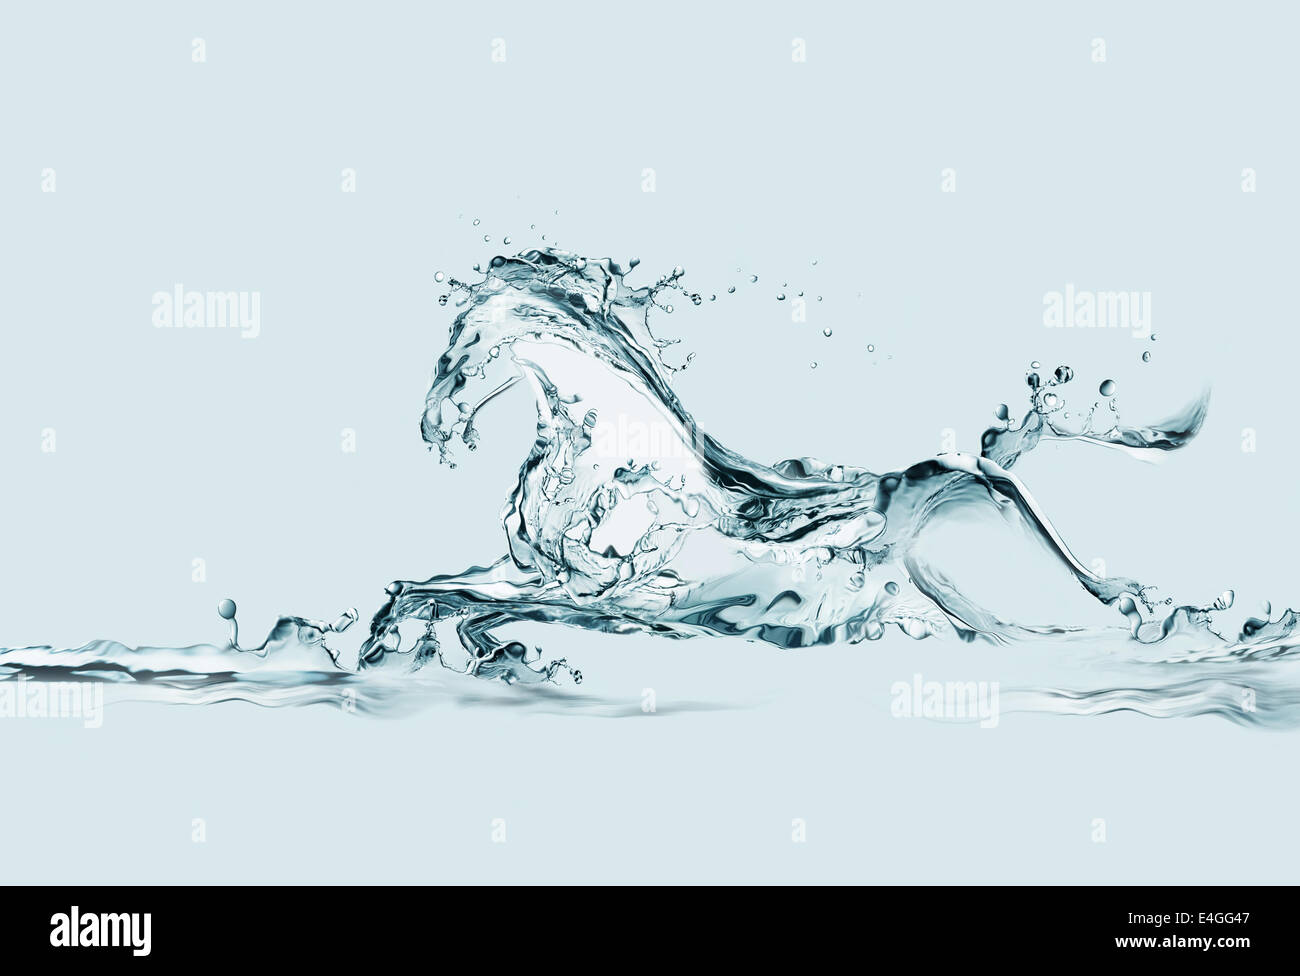 A water horse made of water galloping in water. Stock Photo